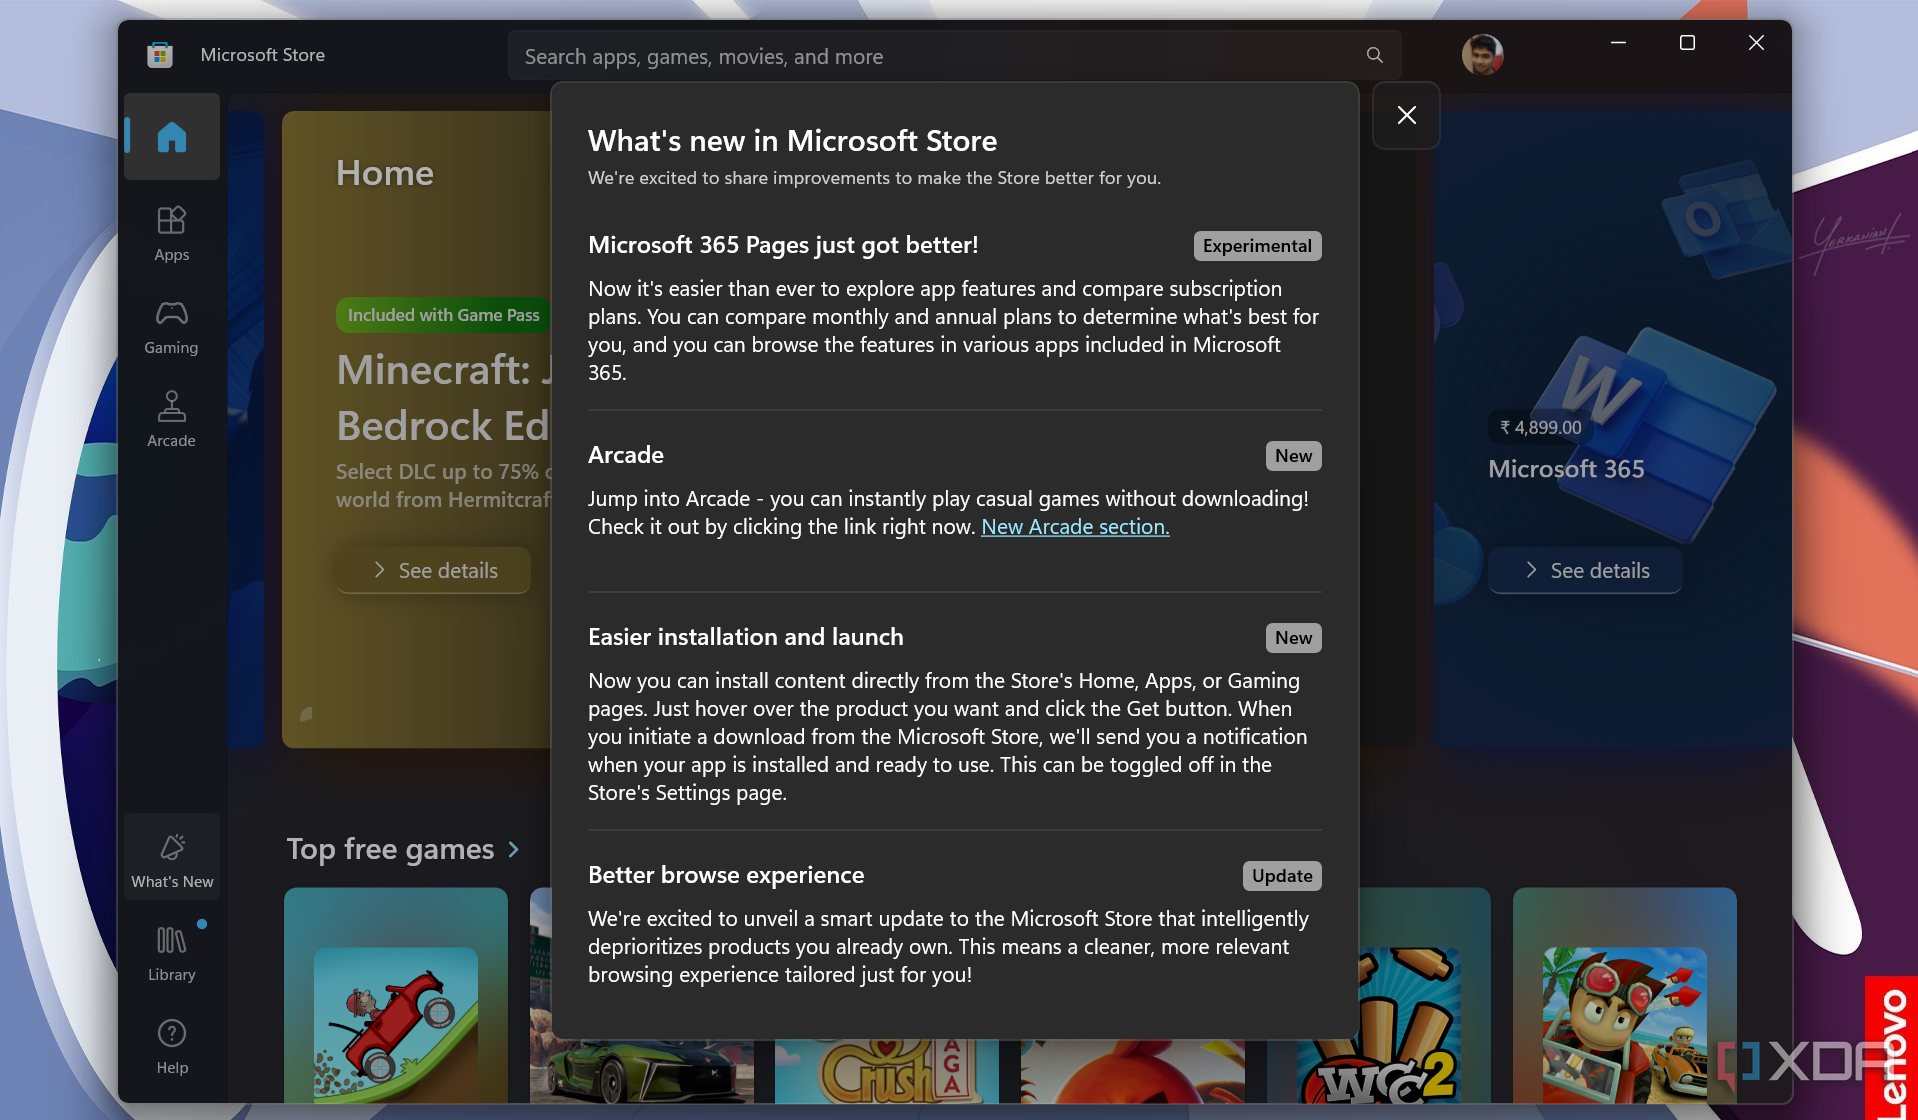 Screenshot showing the latest changes in the Microsoft Store app